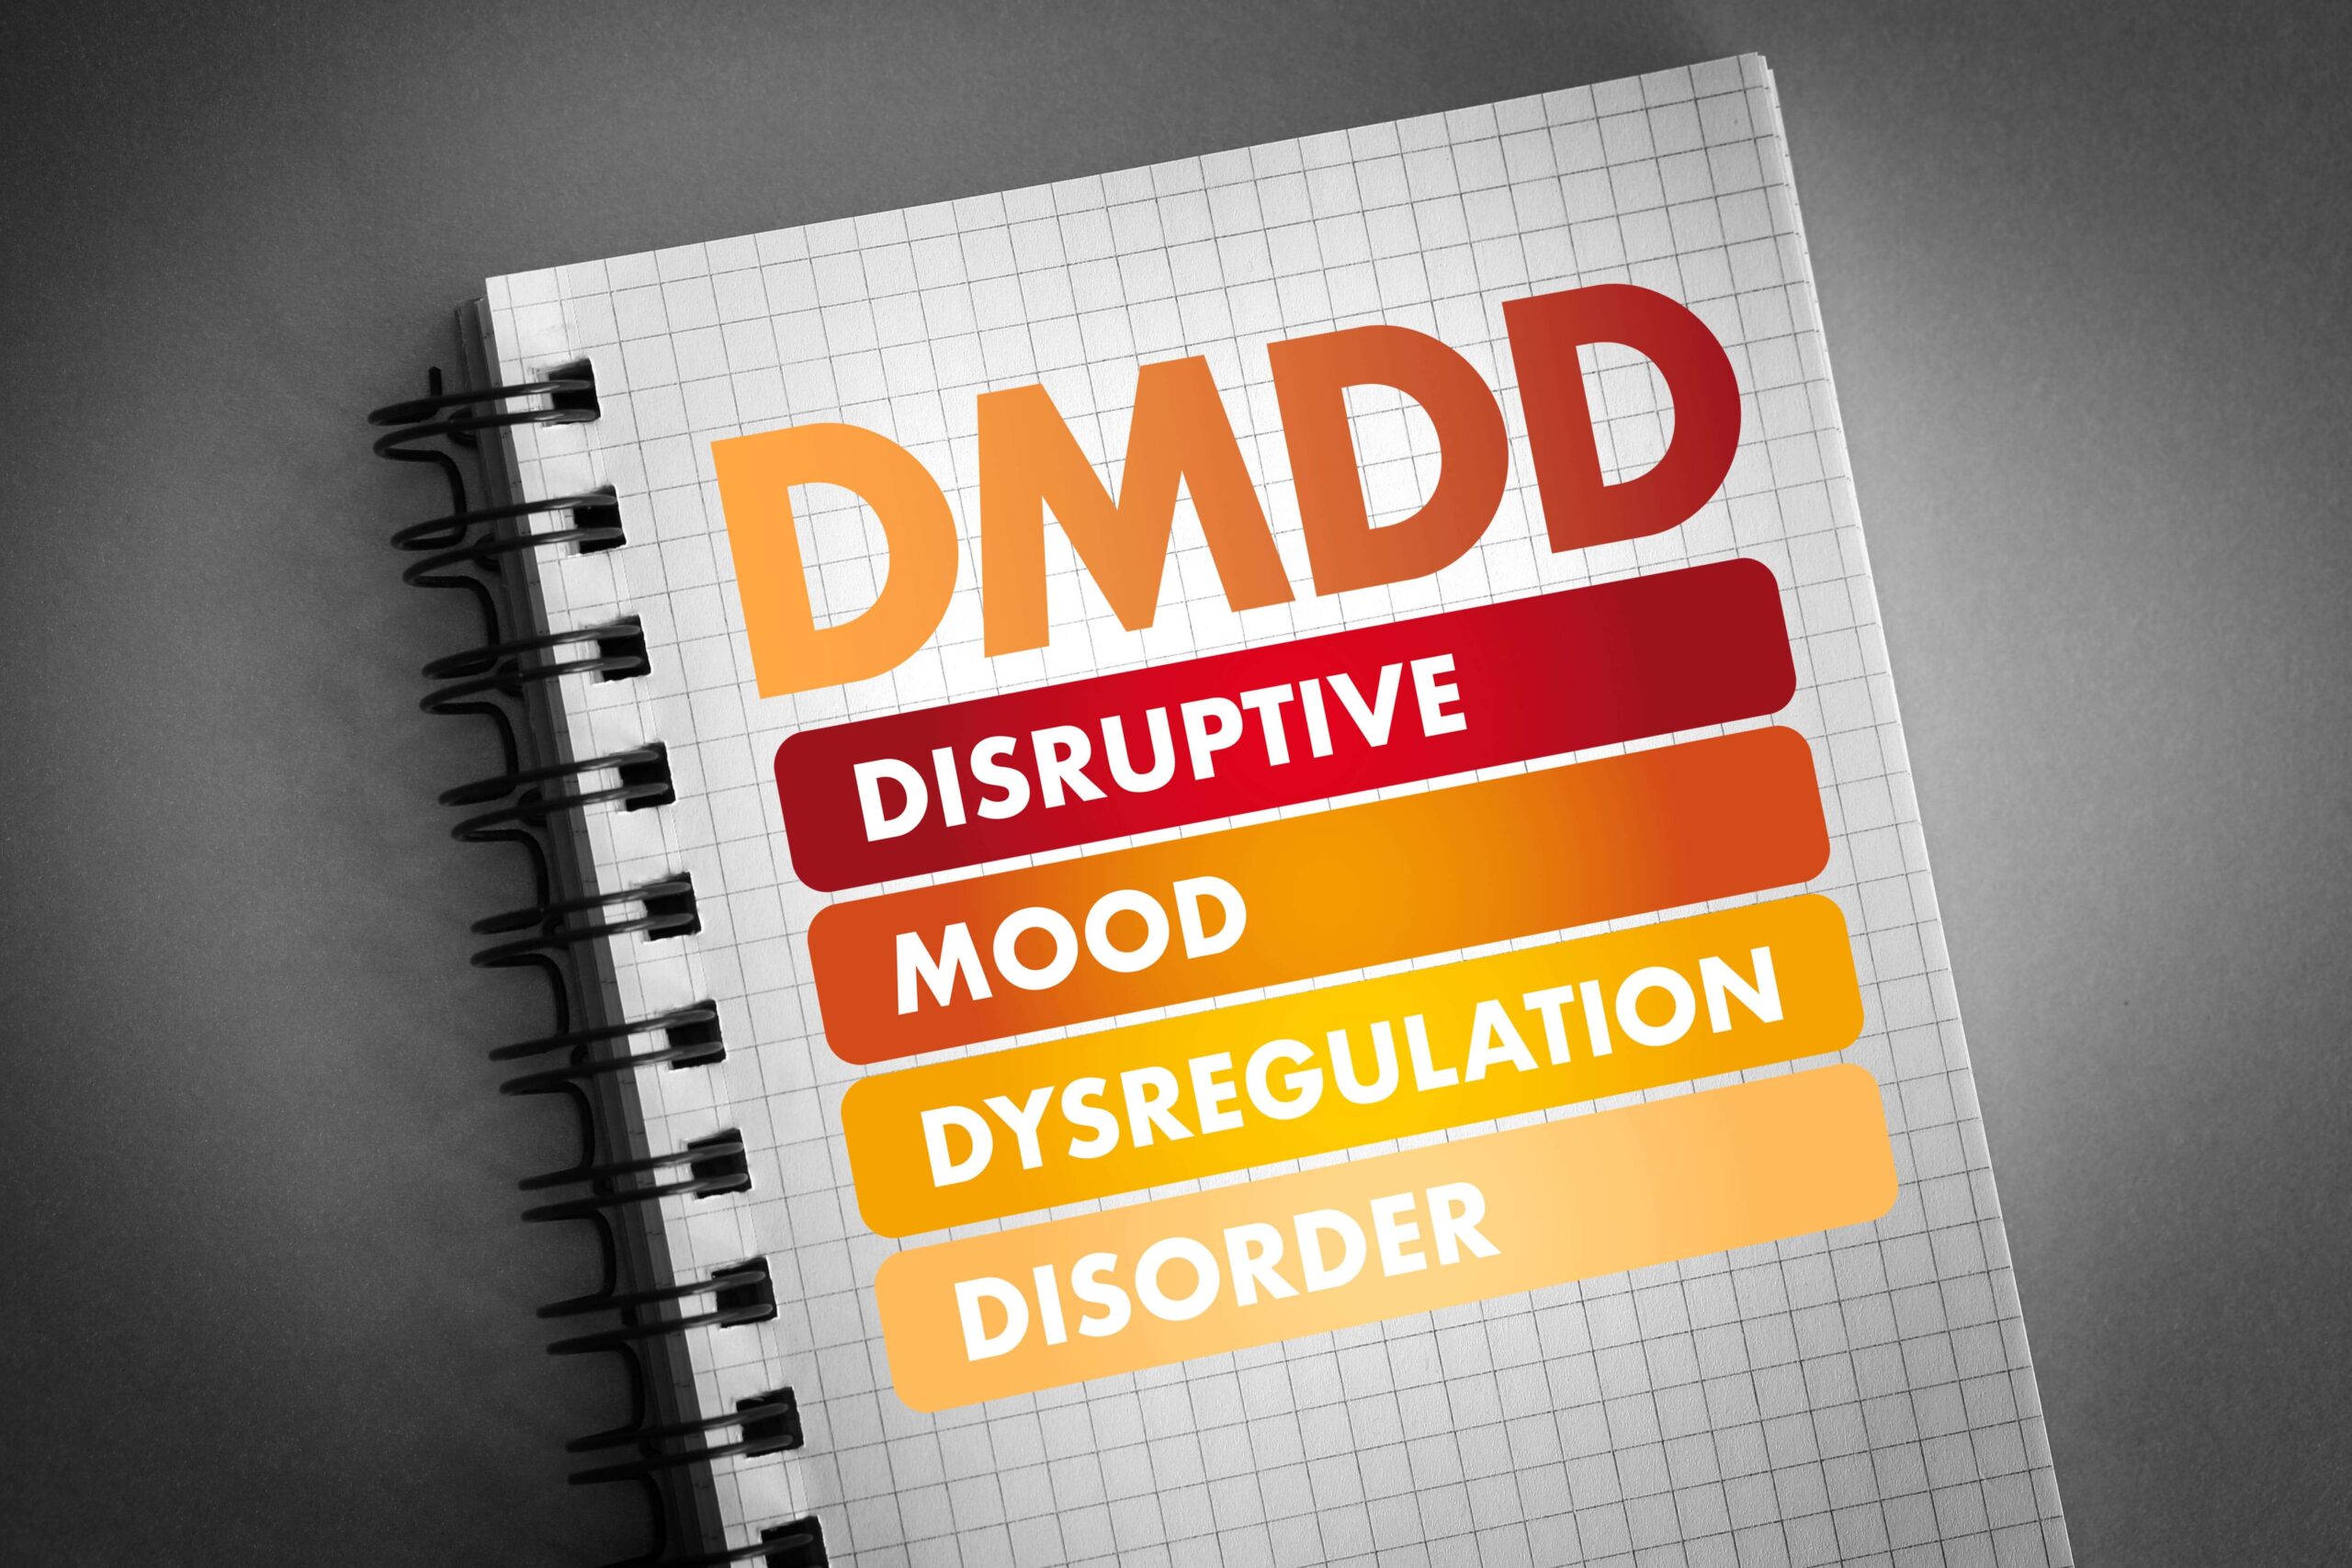 What Is Disruptive Mood Dysregulation Disorder (DMDD) and How Is It Treated?